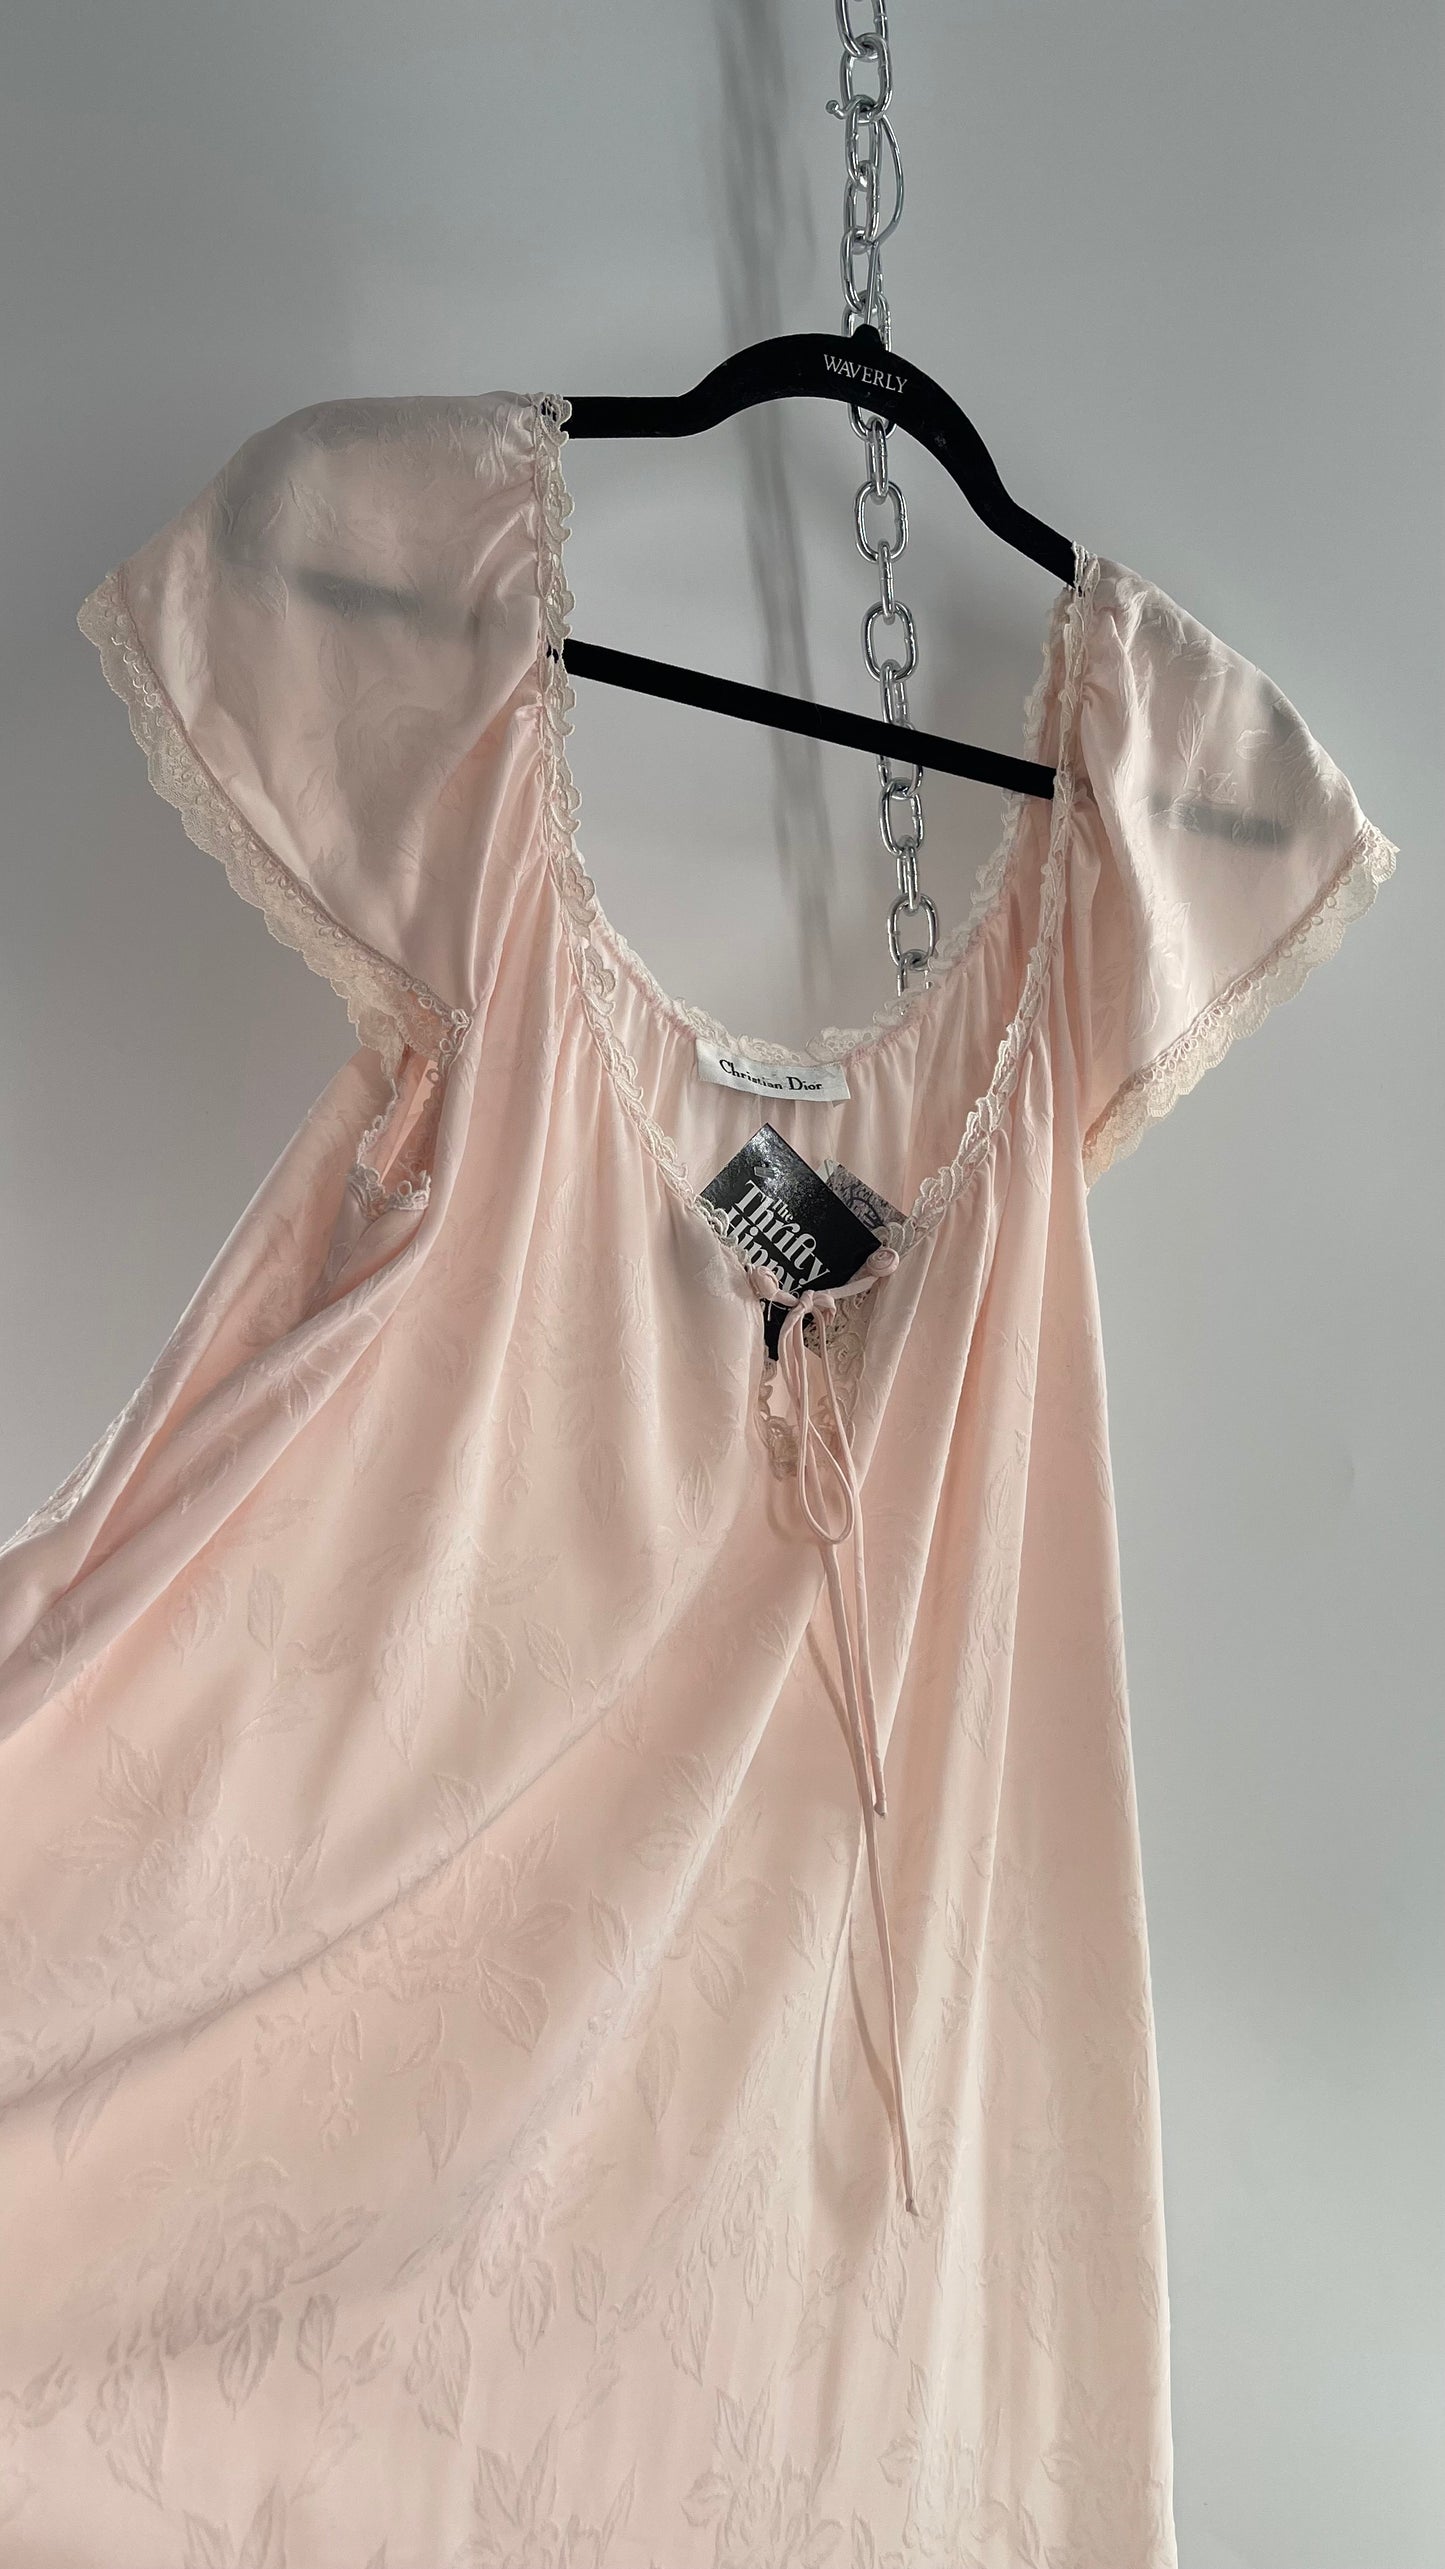 Vintage Christian Dior Pink Night Gown/ Maxi Dress with Floral Embossed Design, Lace Trim and Rosettes (Large)